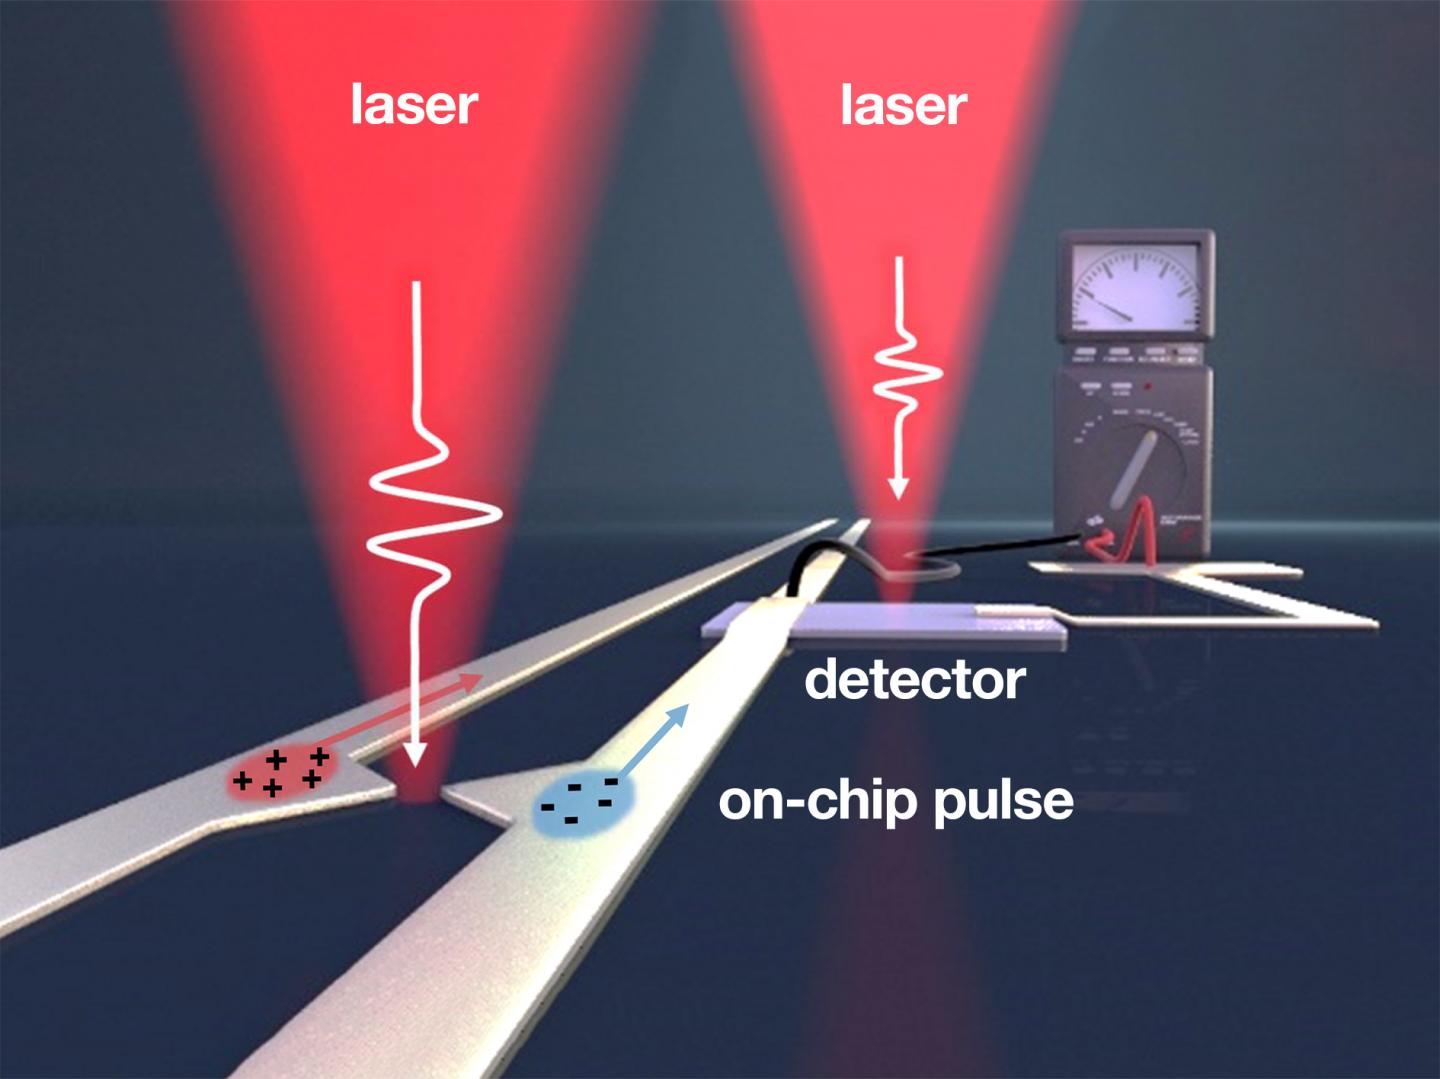 Plasmonic Antennas Could Deliver Ultrafast Pulses for THz Electronics